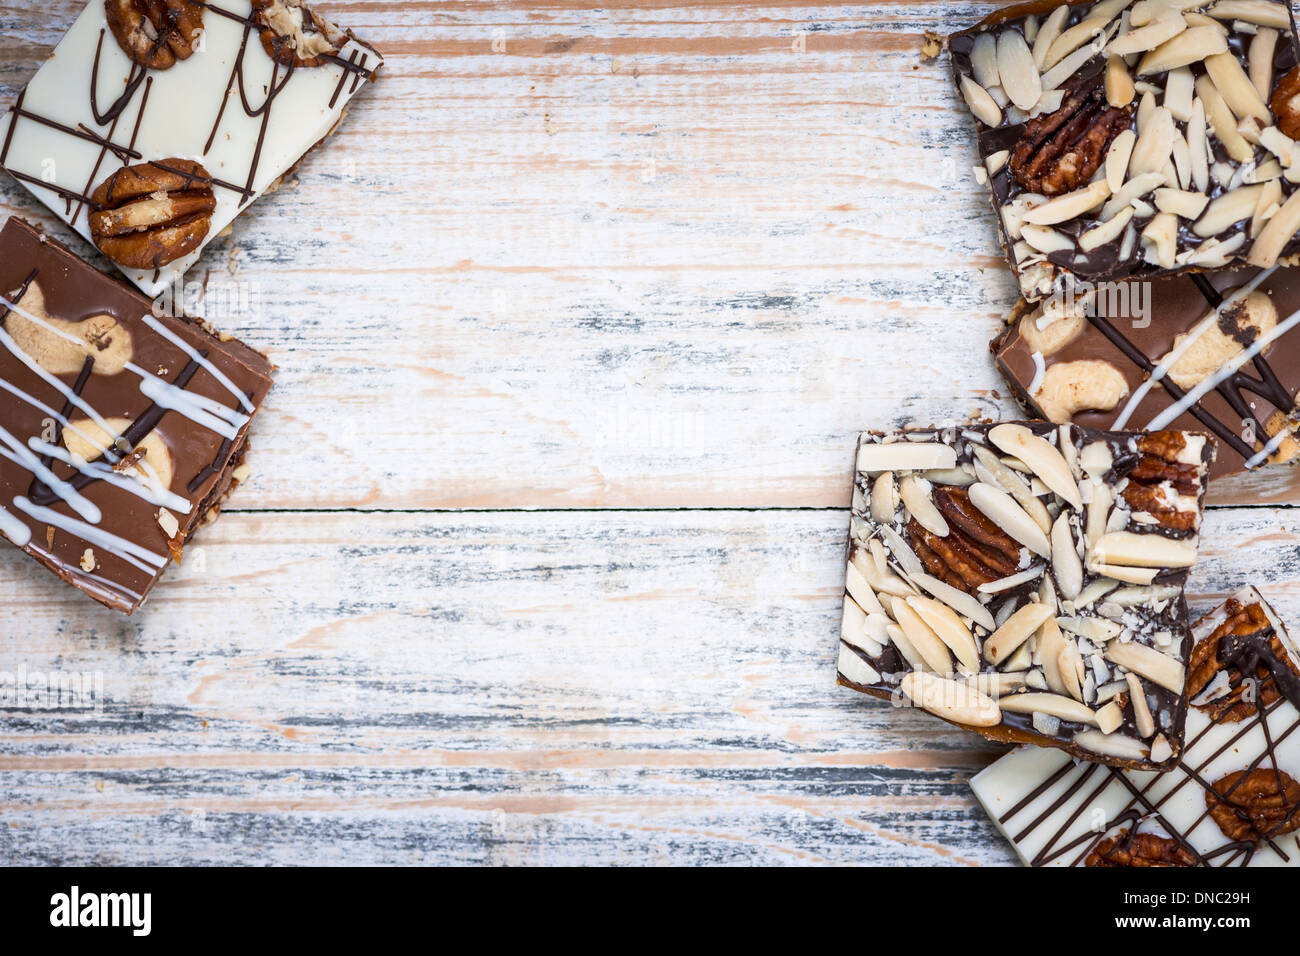 Assorted chocolate caramel bark pieces arranged on wooden background from above with copy space Stock Photo